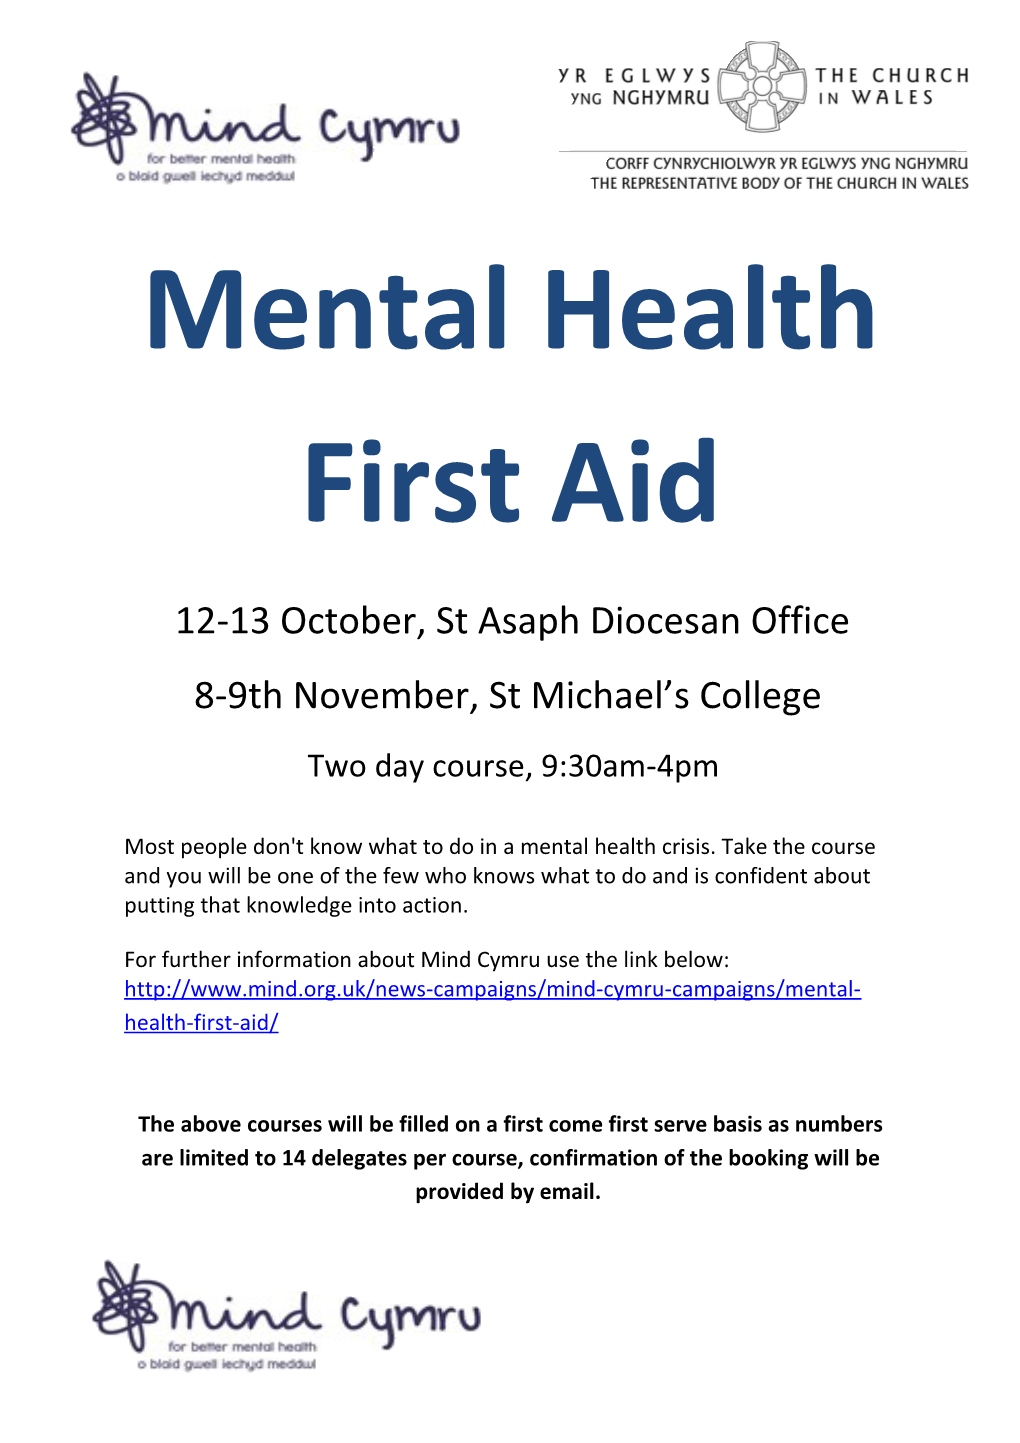 12-13 October, St Asaph Diocesan Office